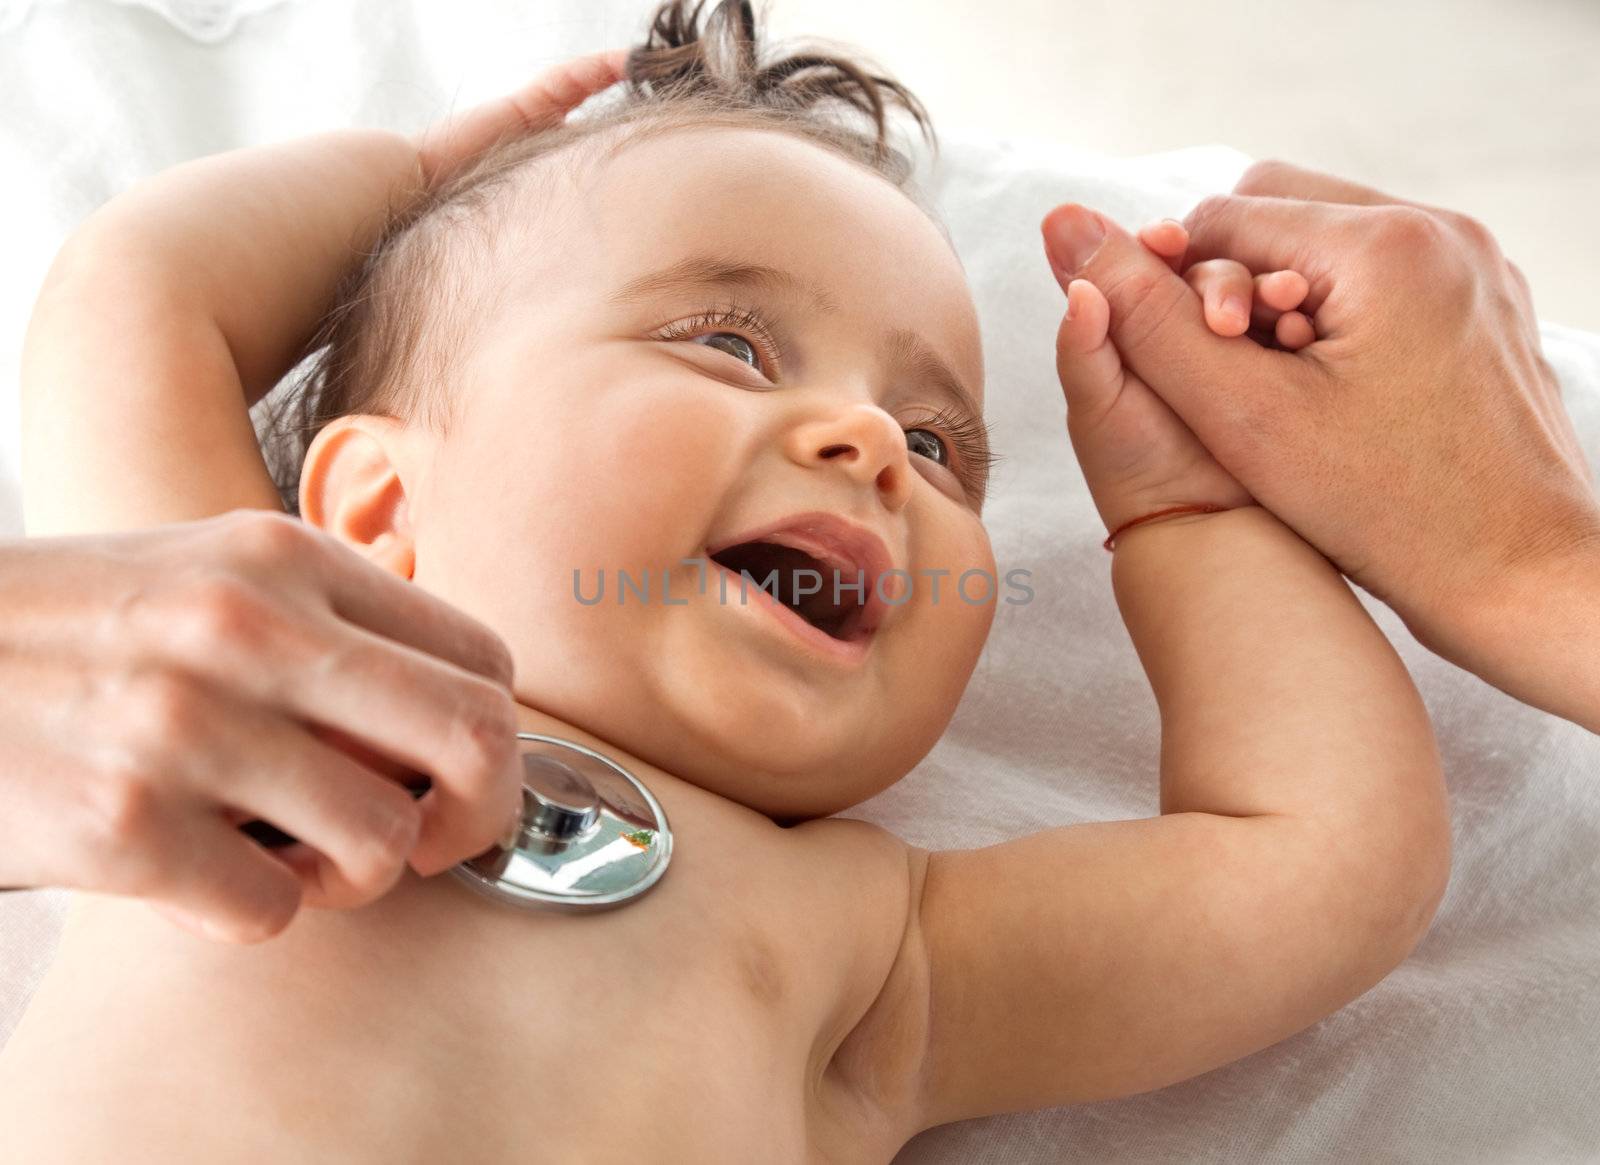 Sweet baby examined with stethoscope, holding mother's hand smiling